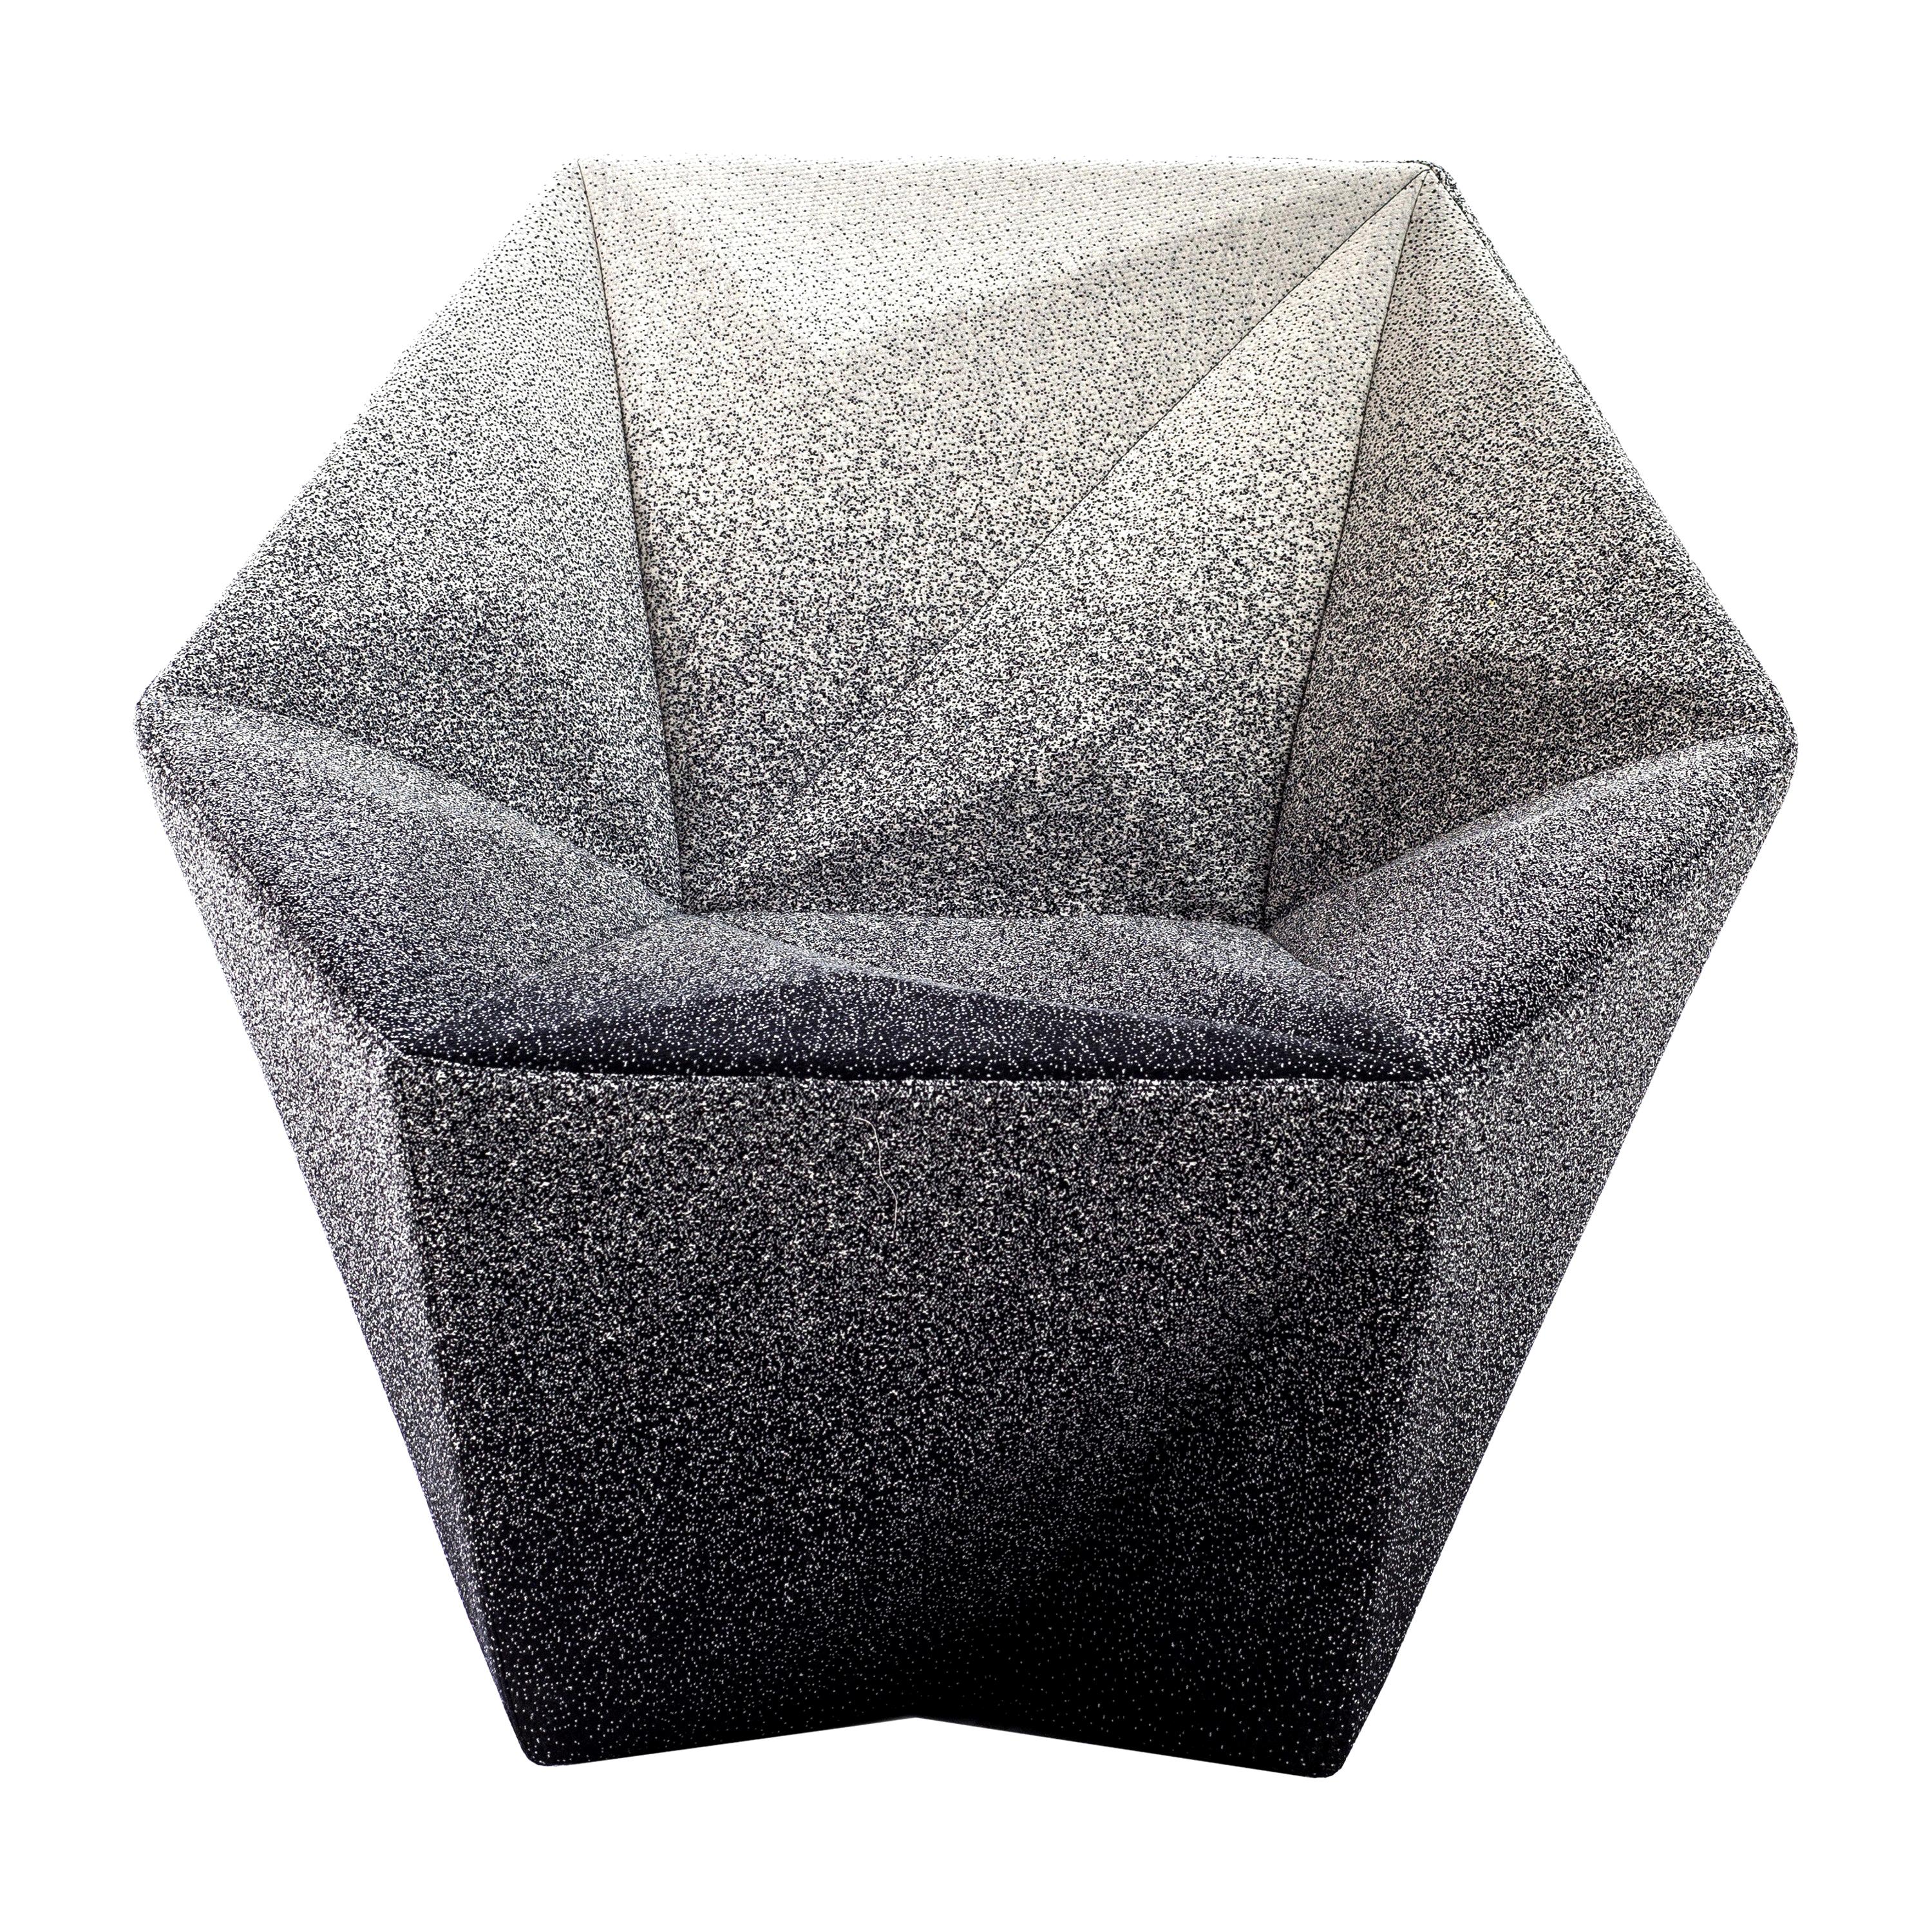 Moroso Gemma Armchair in Blur Black and White by Daniel Libeskind For Sale